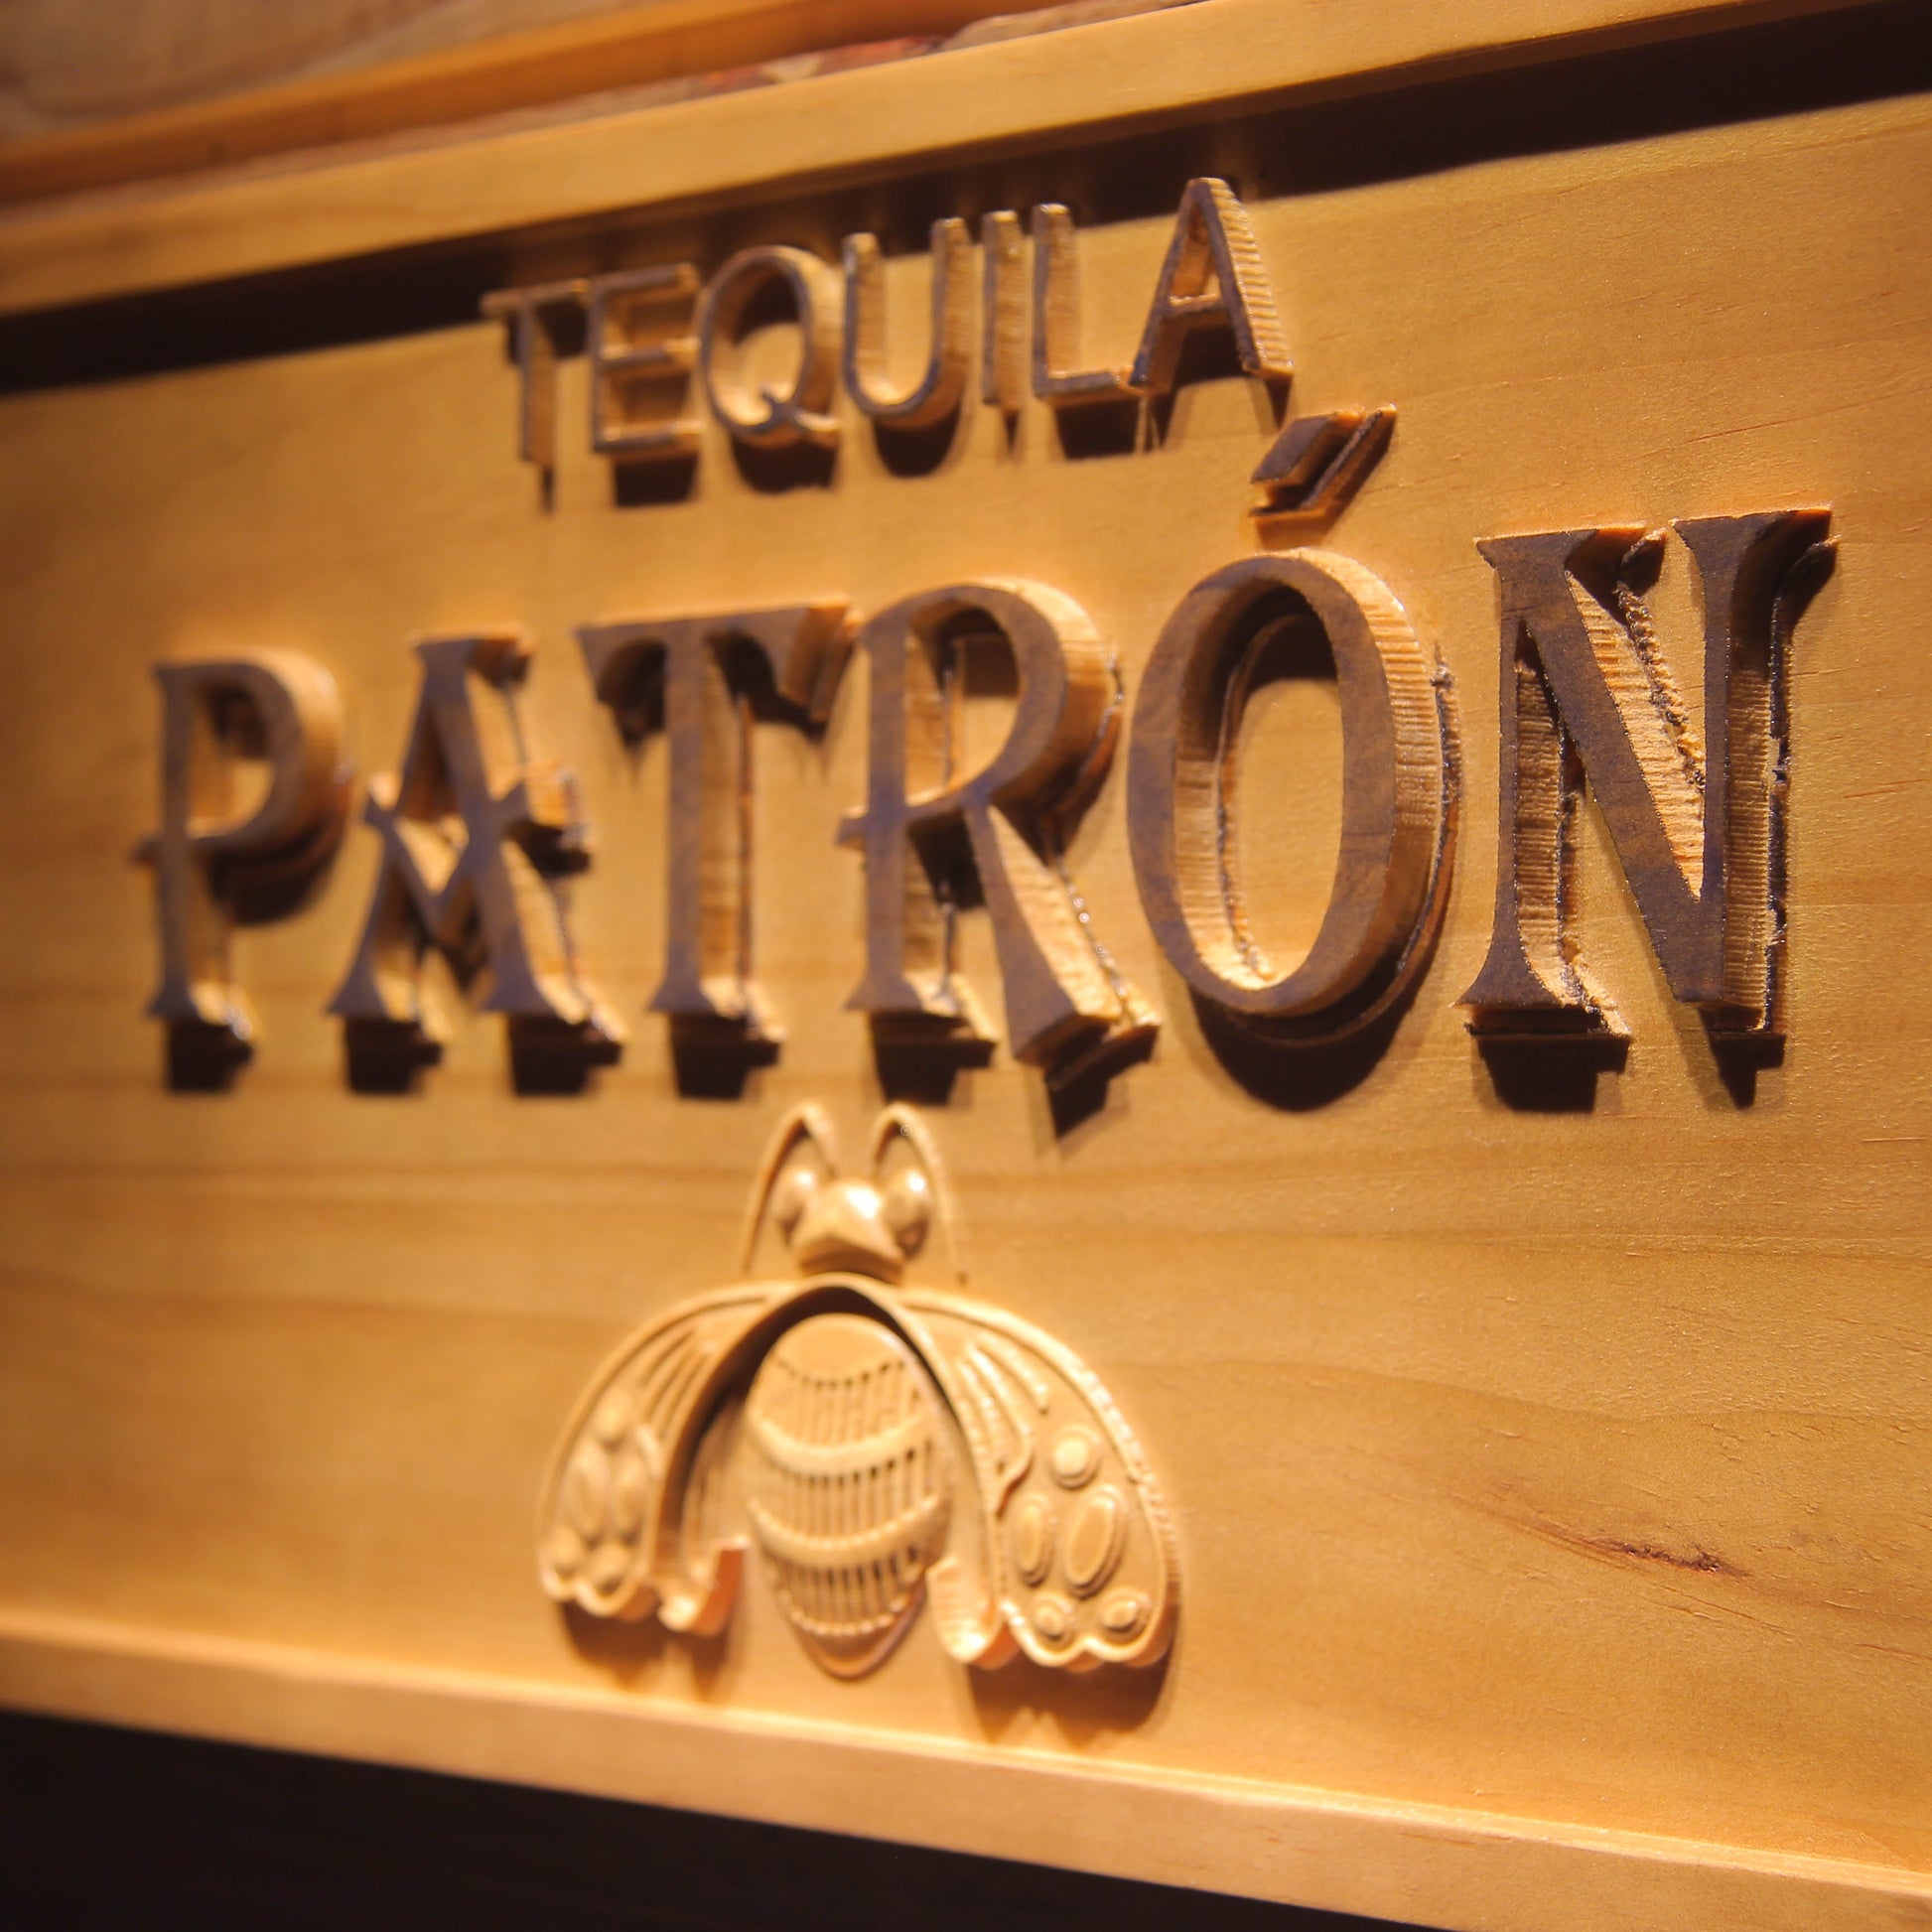 Tequila Patron Bar 3D Wooden Signs by Woody Signs Co. - Handmade Crafted Unique Wooden Creative